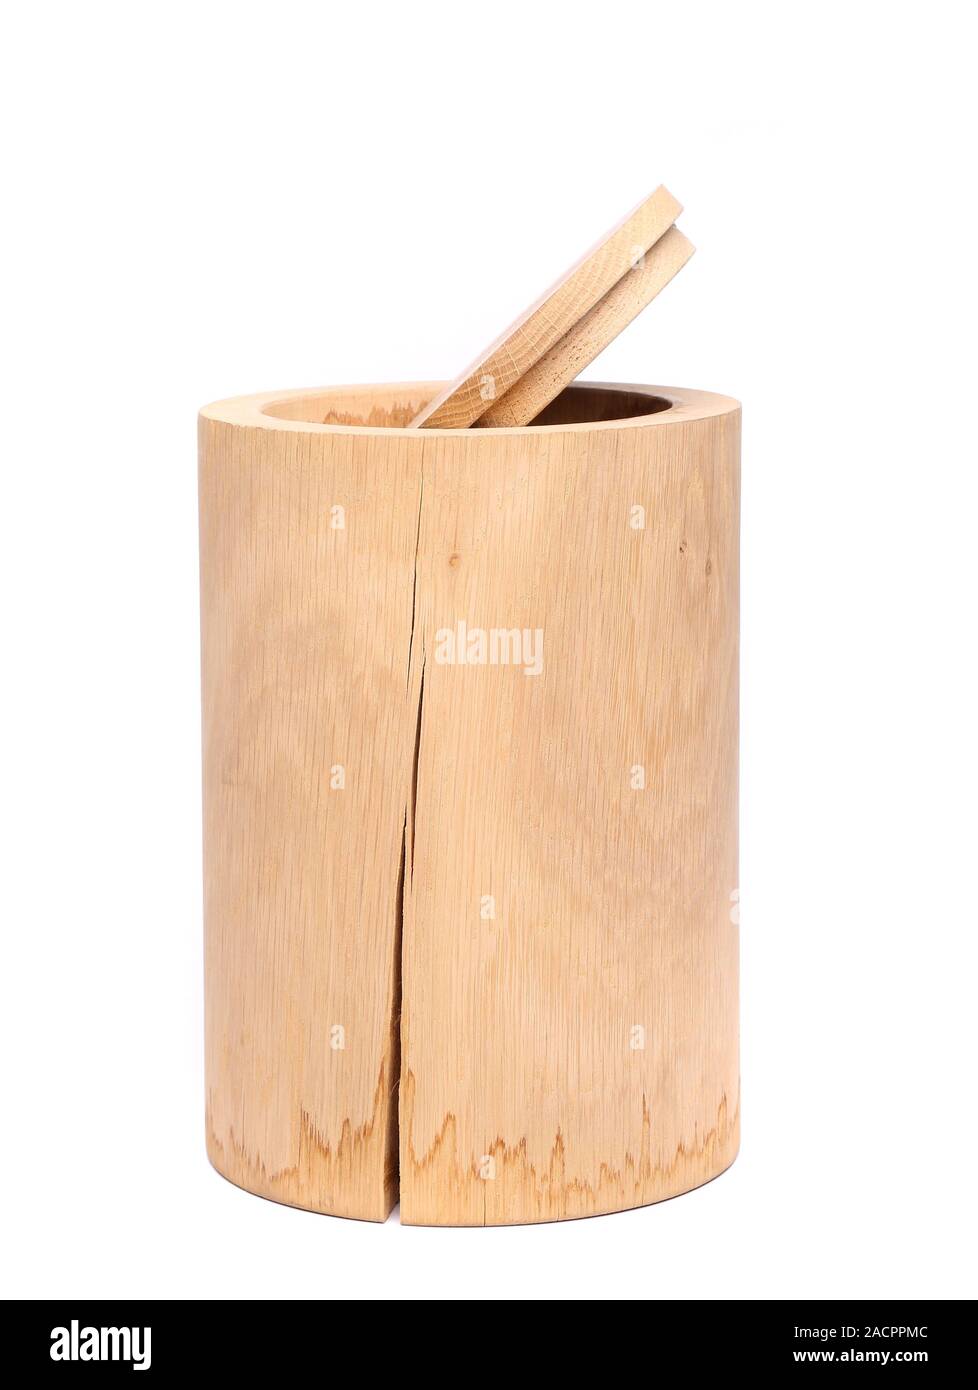 Birch bark container with open top Stock Photo